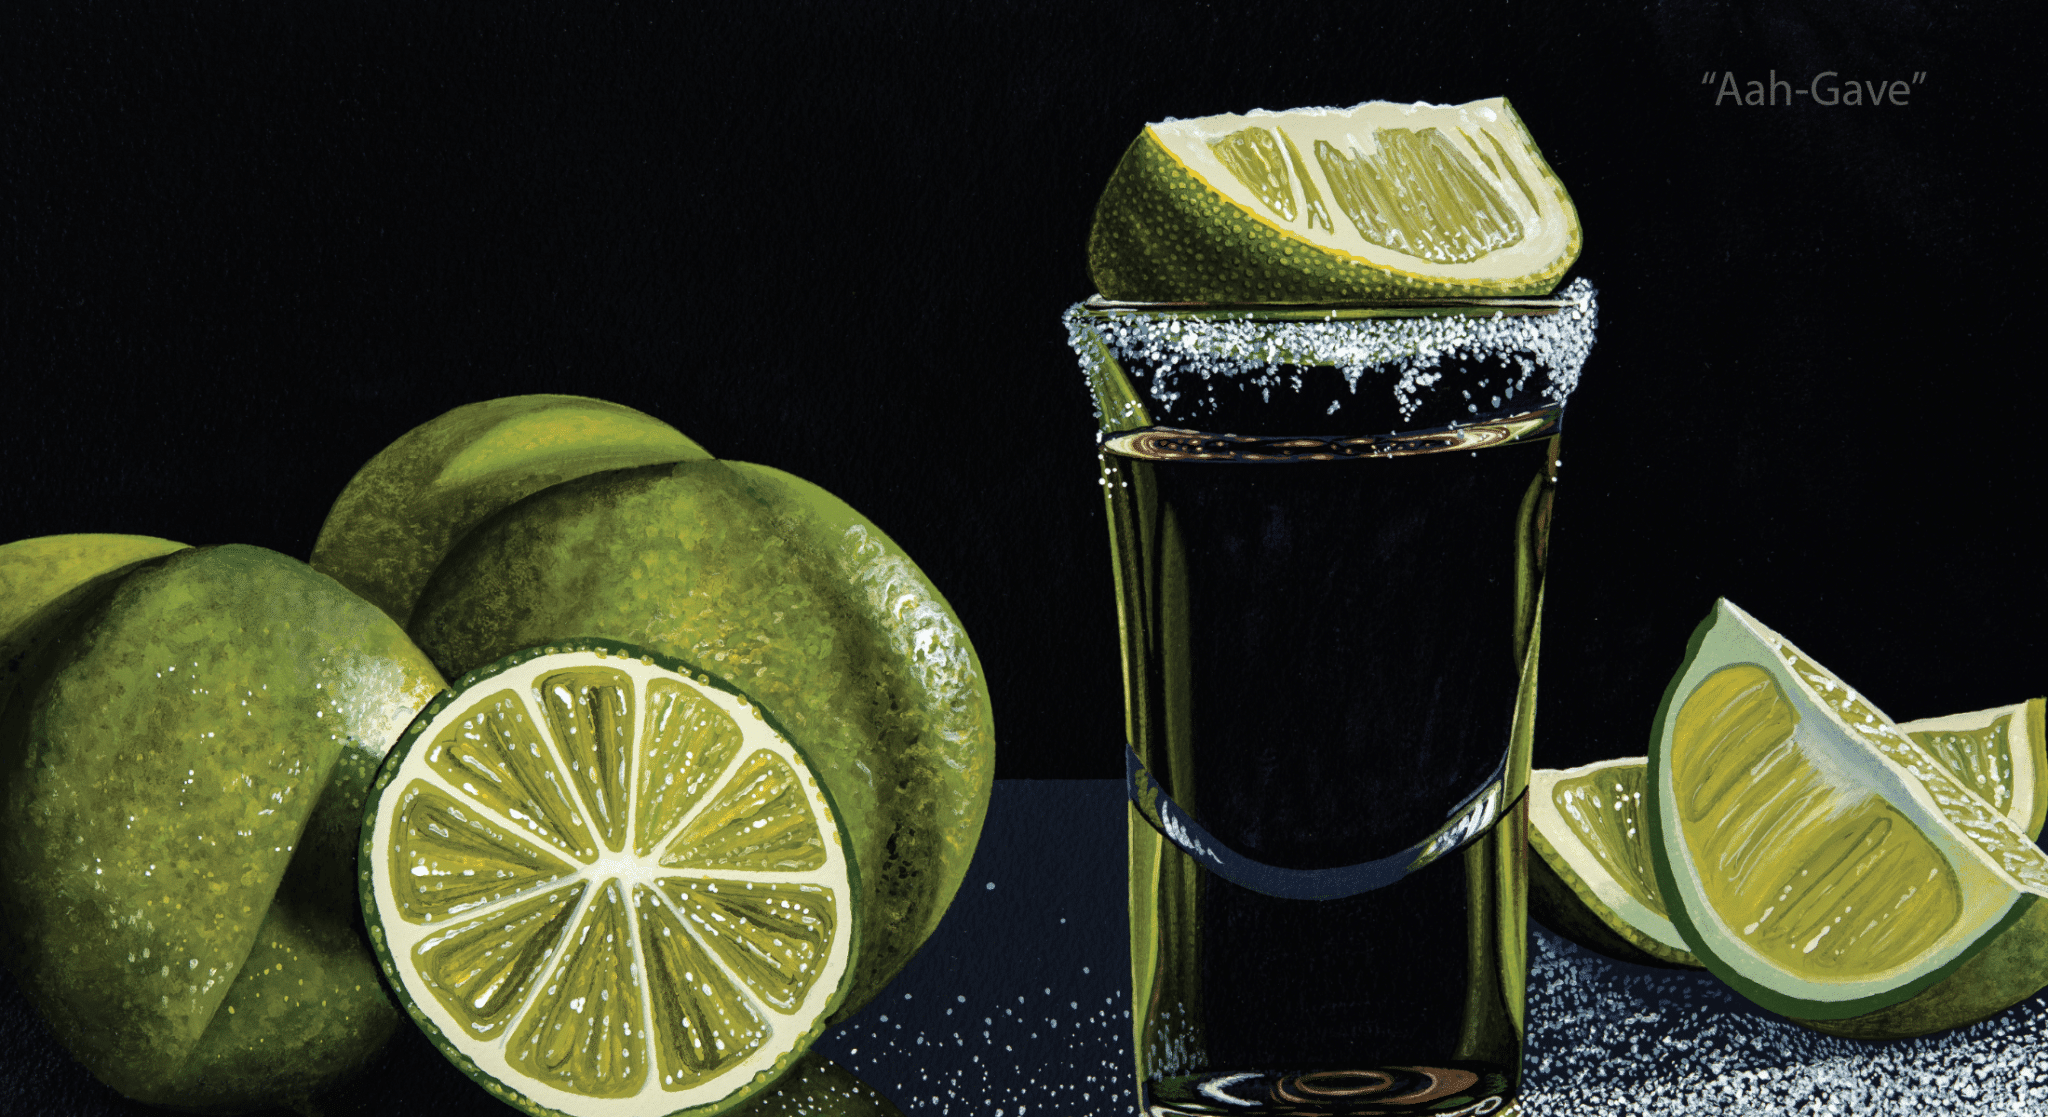 Scott Jacobs' painting, "Aah Gave" of limes and tequila